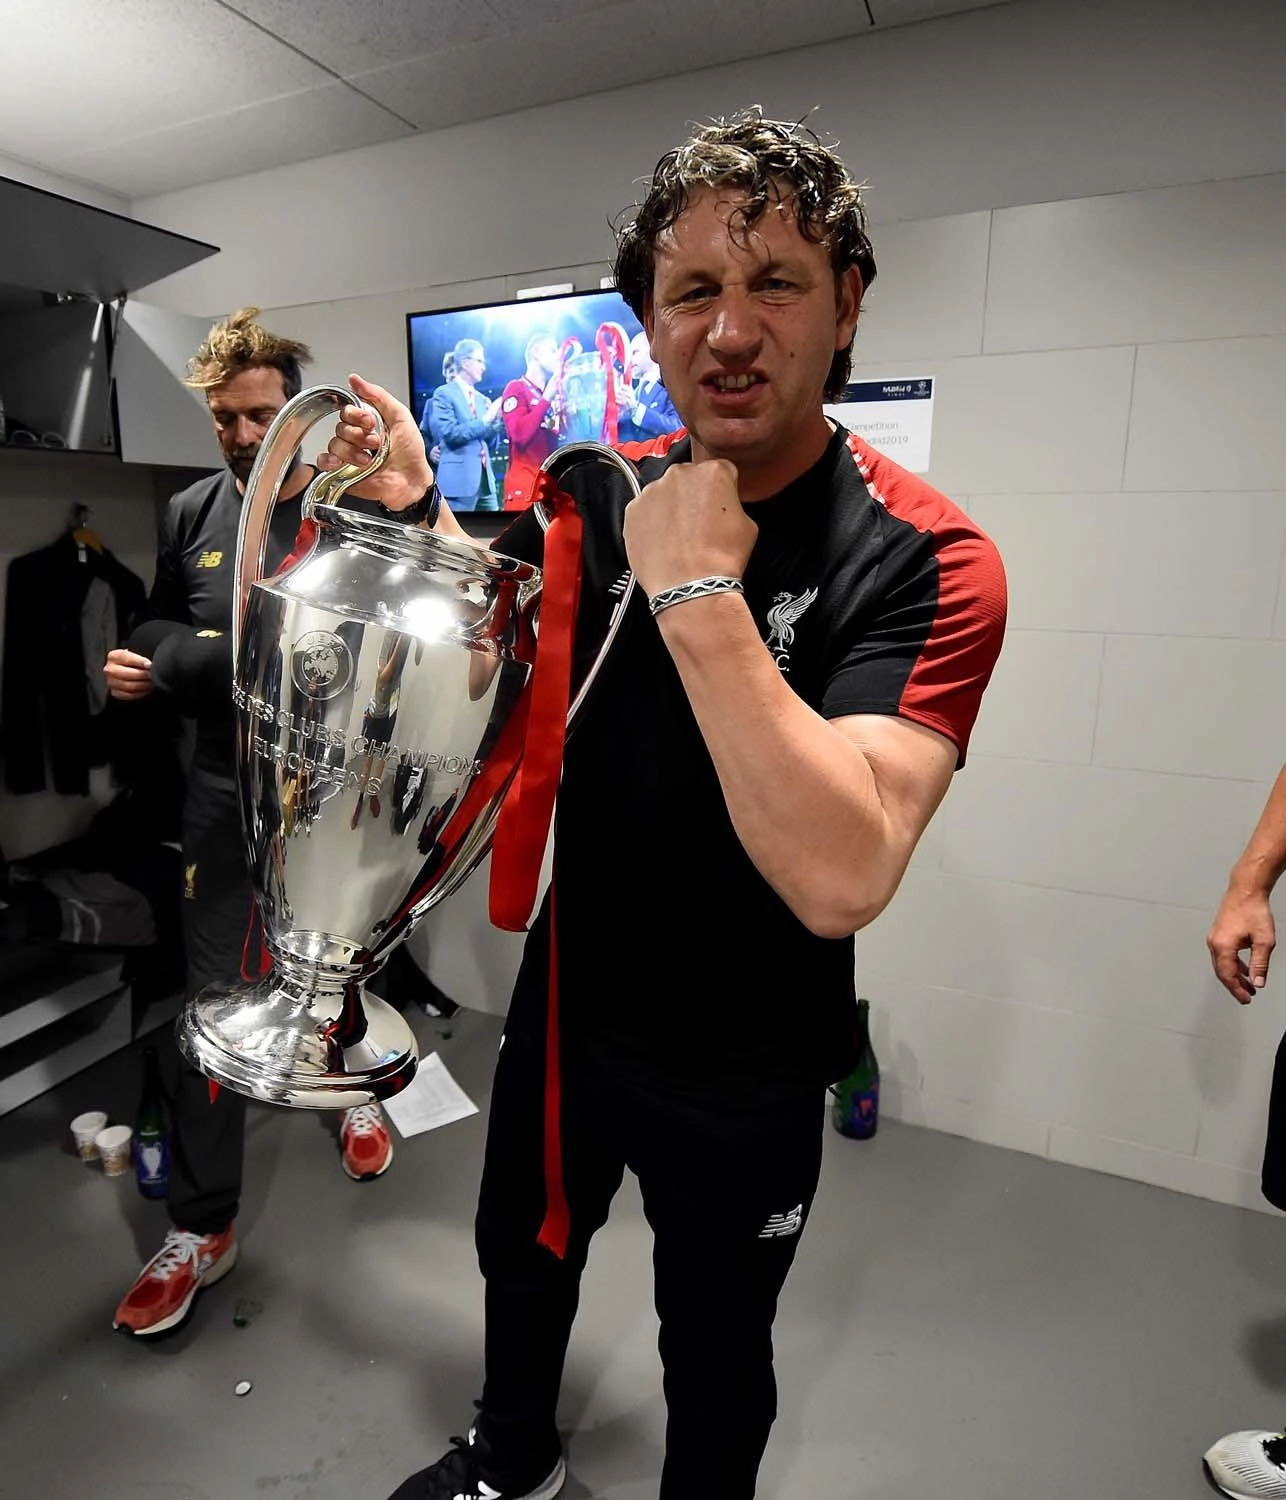 Mission accomplished: Champions League glory in 2019